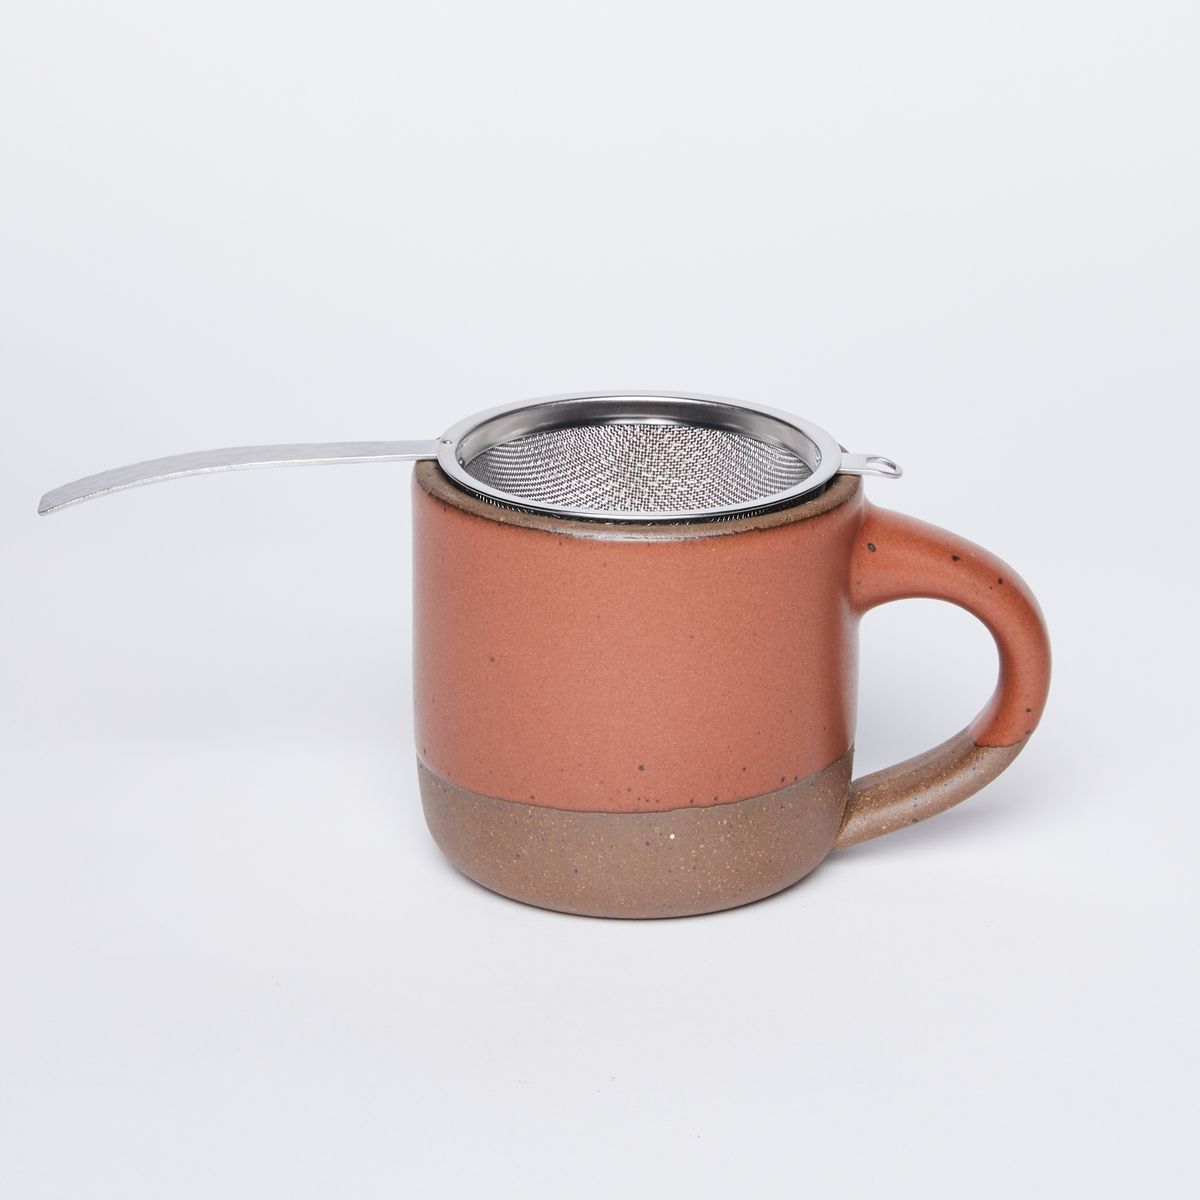 Stainless steel half dome strainer with steel handle on top of The Small Mug in Amaro